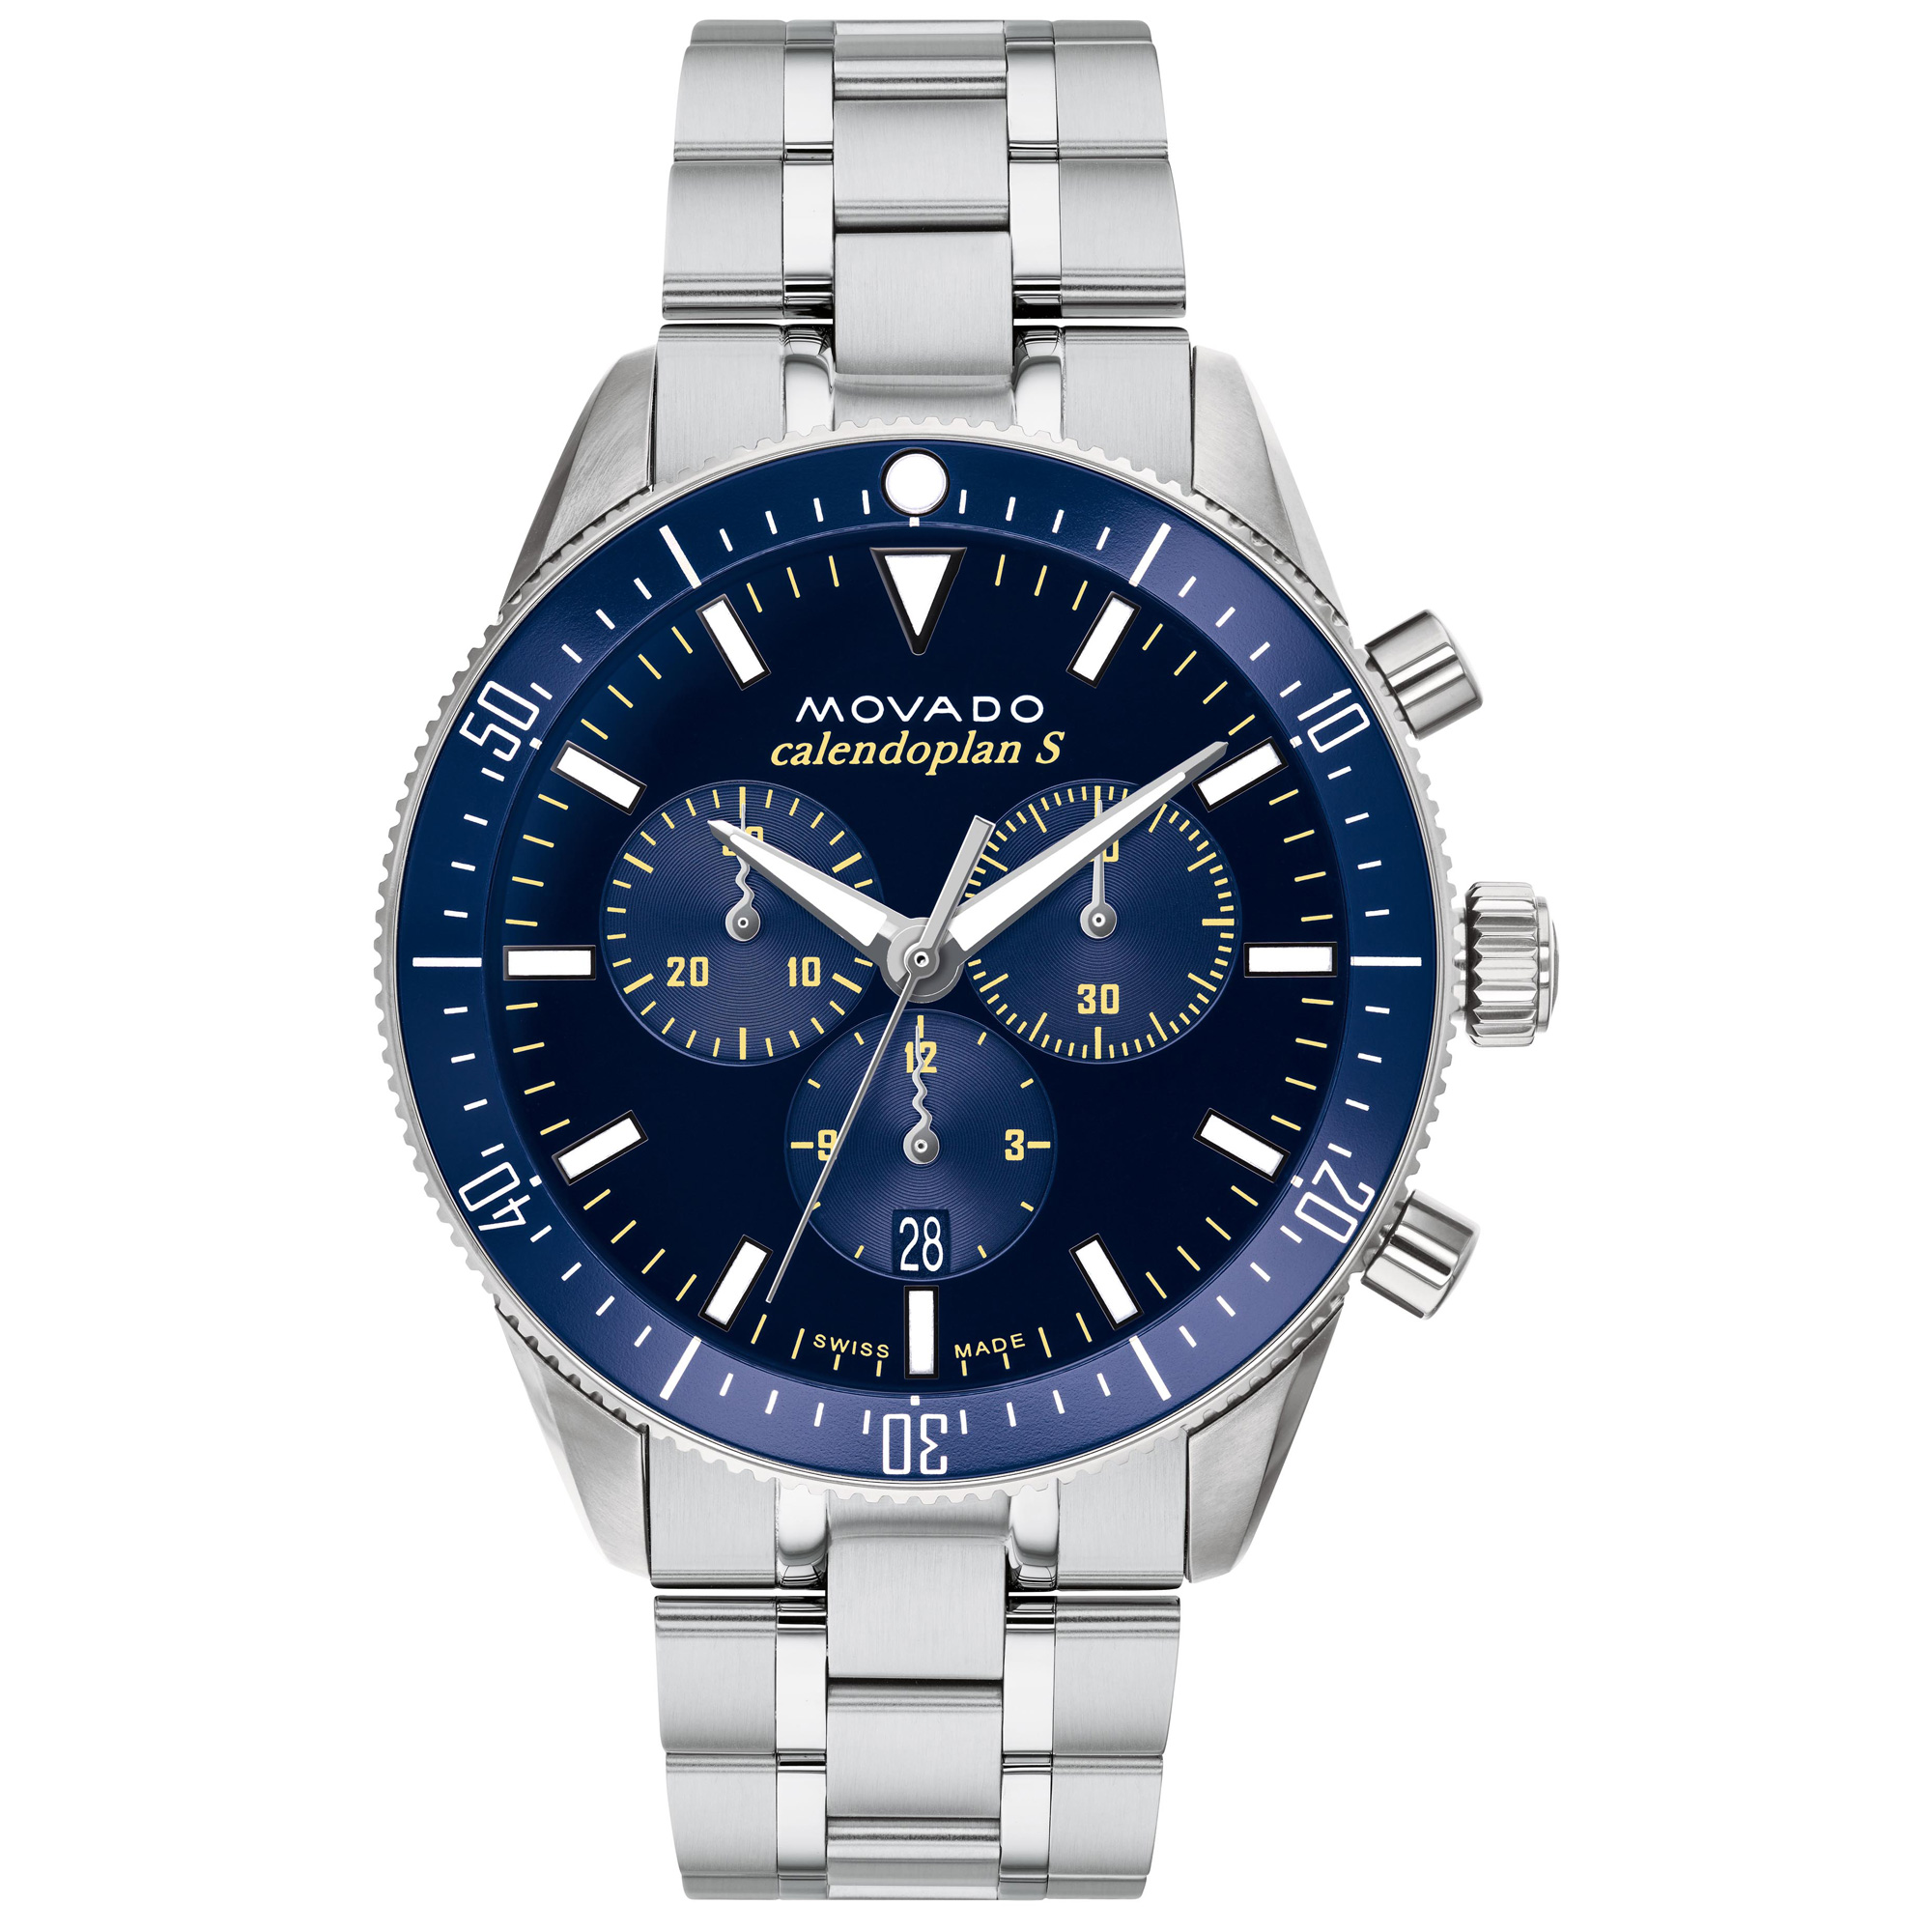 Heritage Series Calendoplan S Chronograph Blue Dial and Stainless Steel Bracelet Watch | 42mm | - Movado 3650124